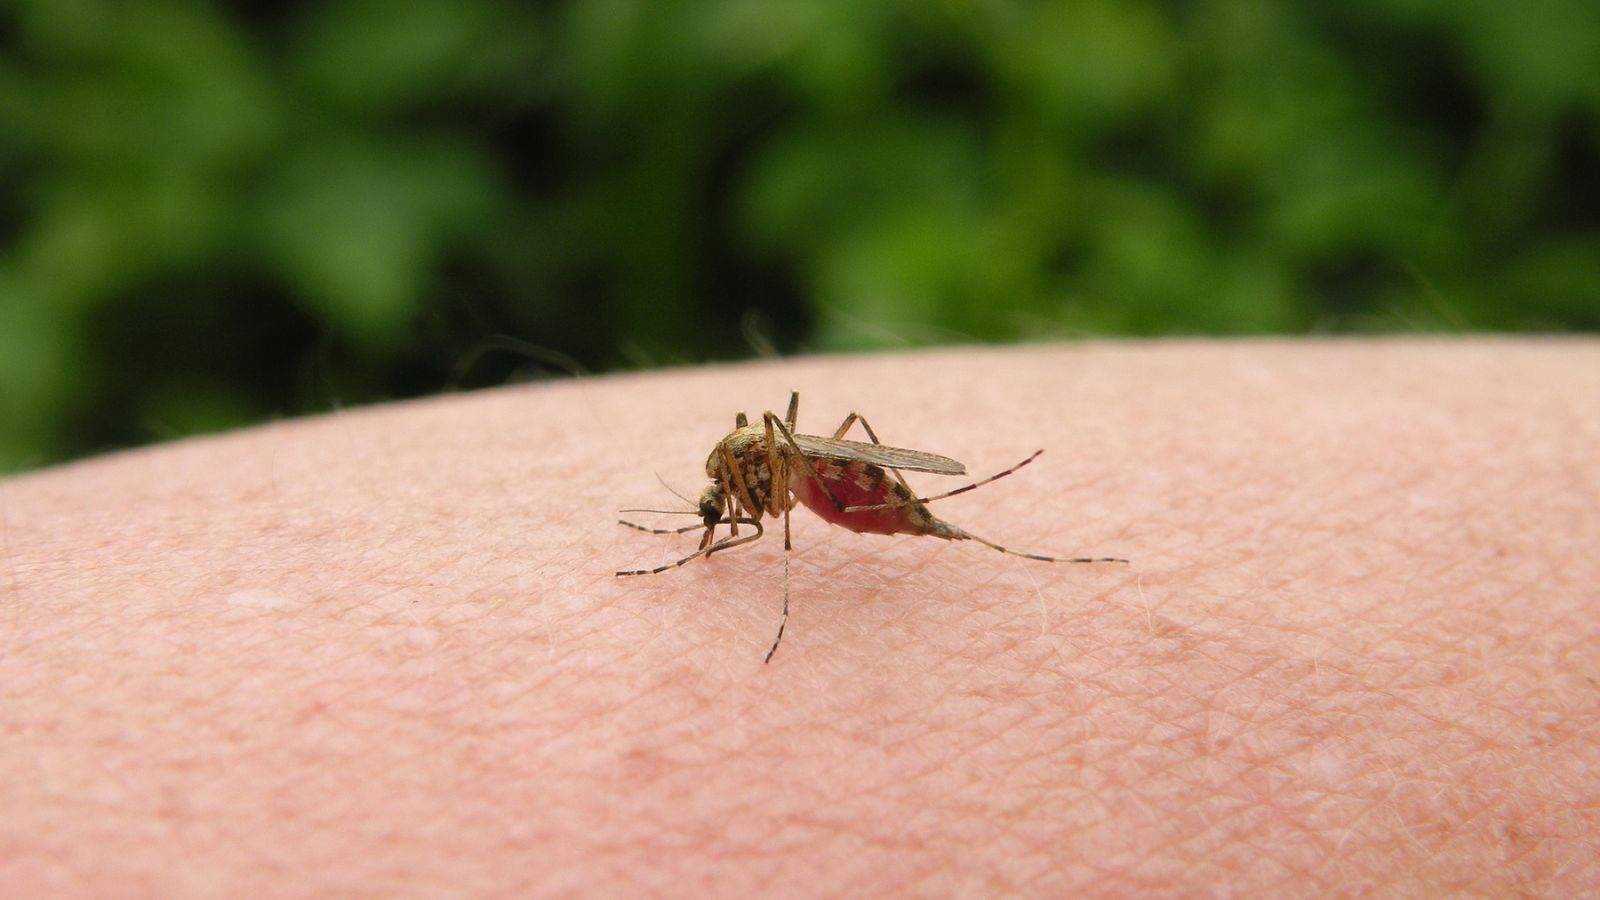 a mosquito on a person's skin